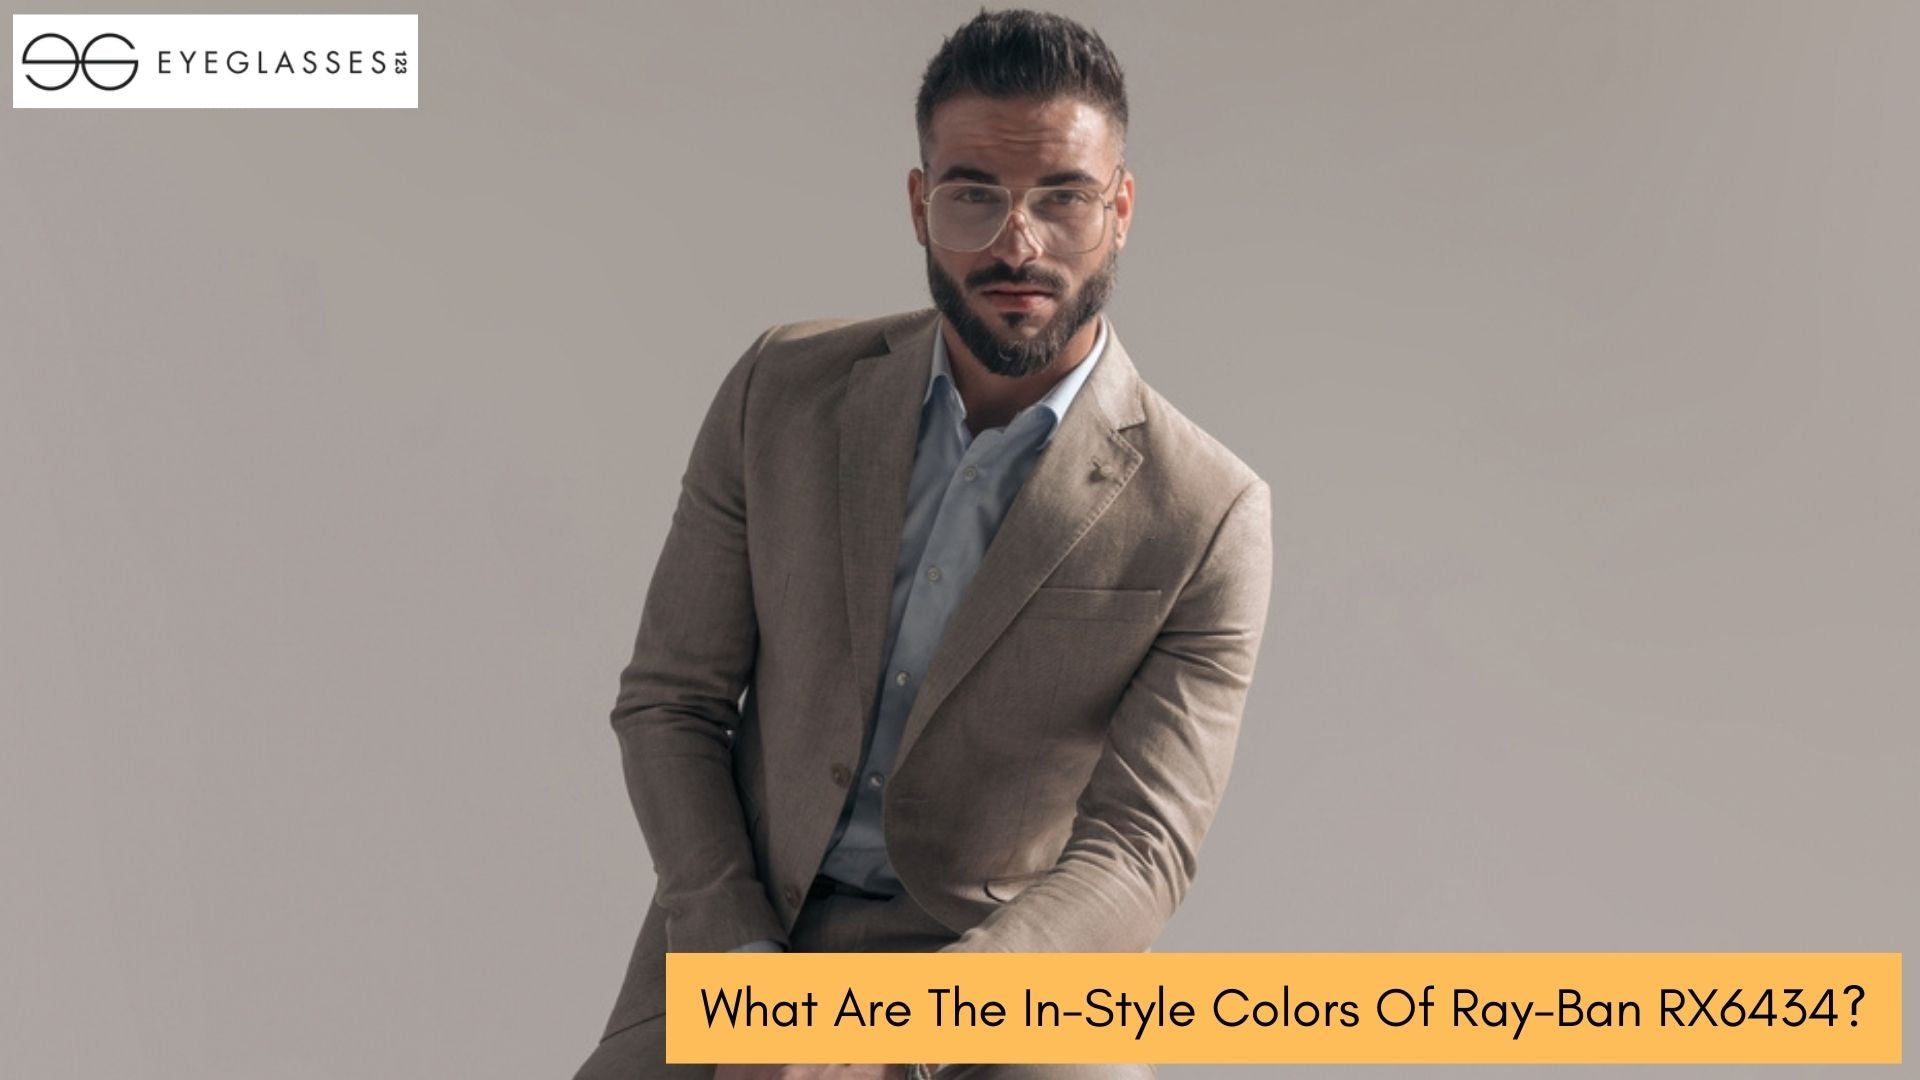 What Are The In-Style Colors Of Ray-Ban RX6434?